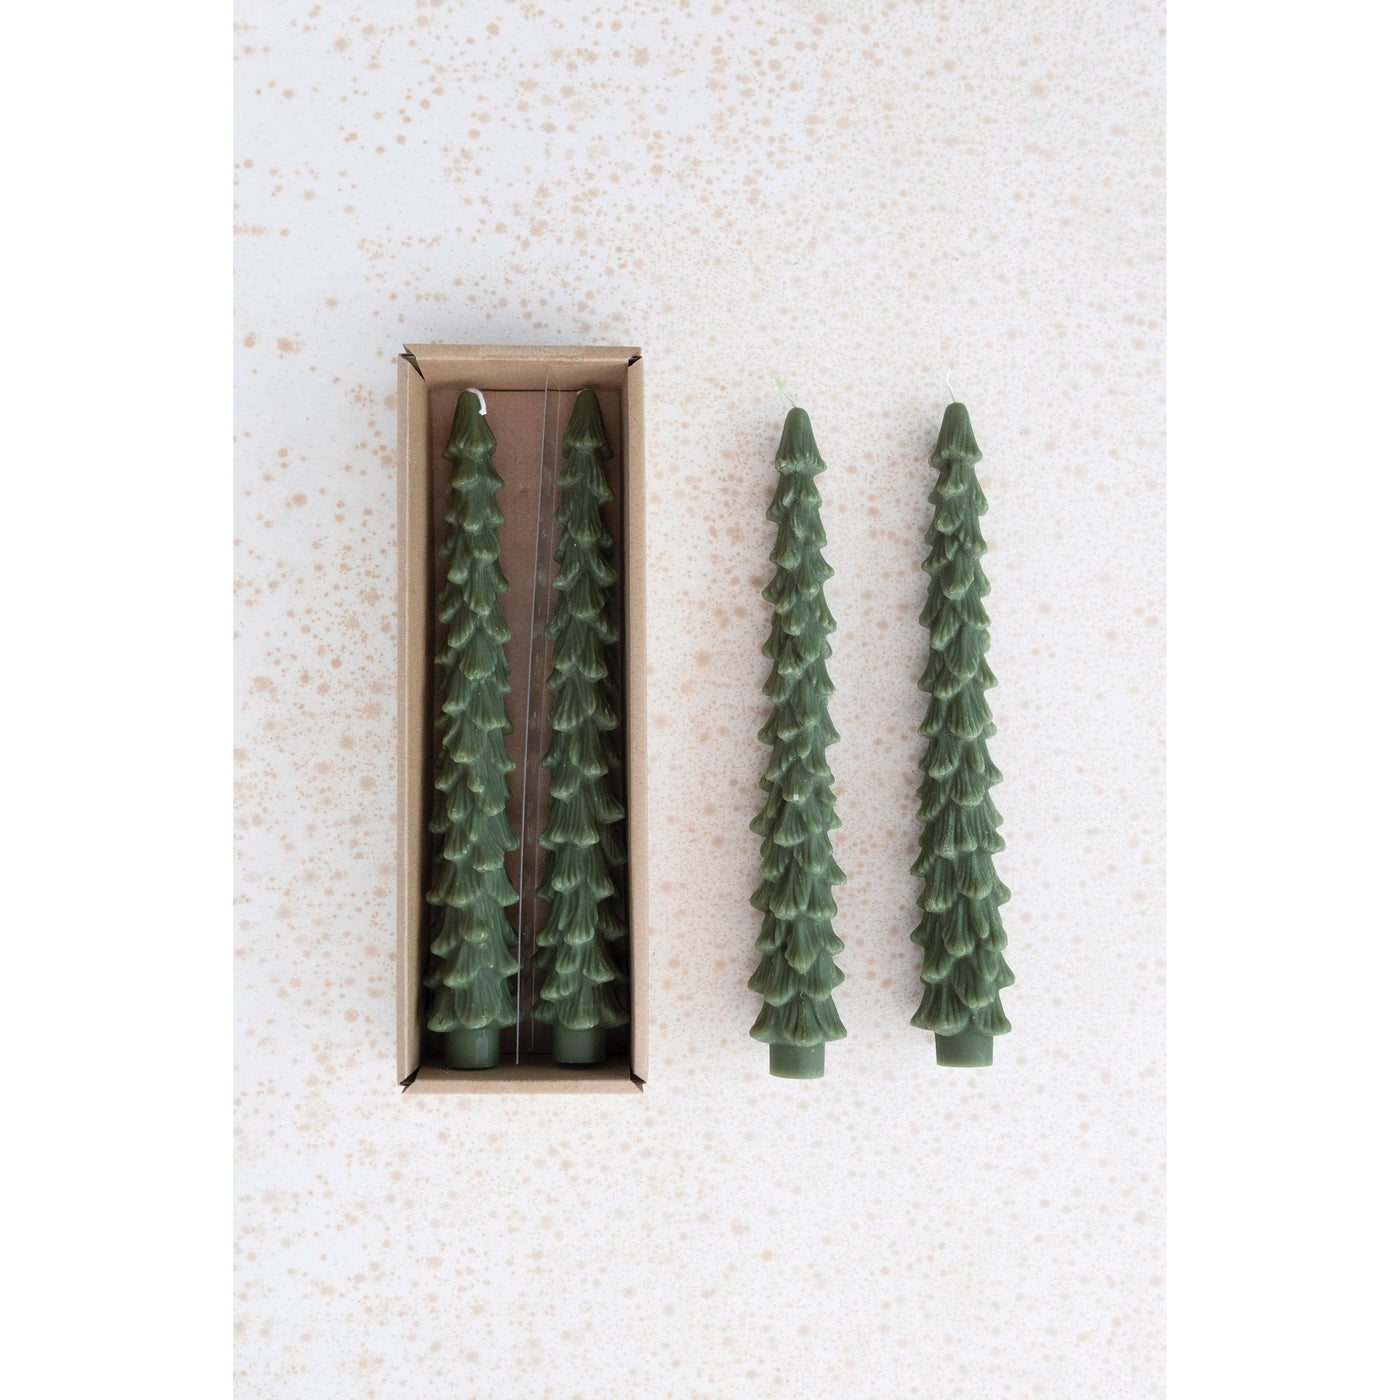 Set of 2 Tree Shaped Candles Tapers - Evergreen